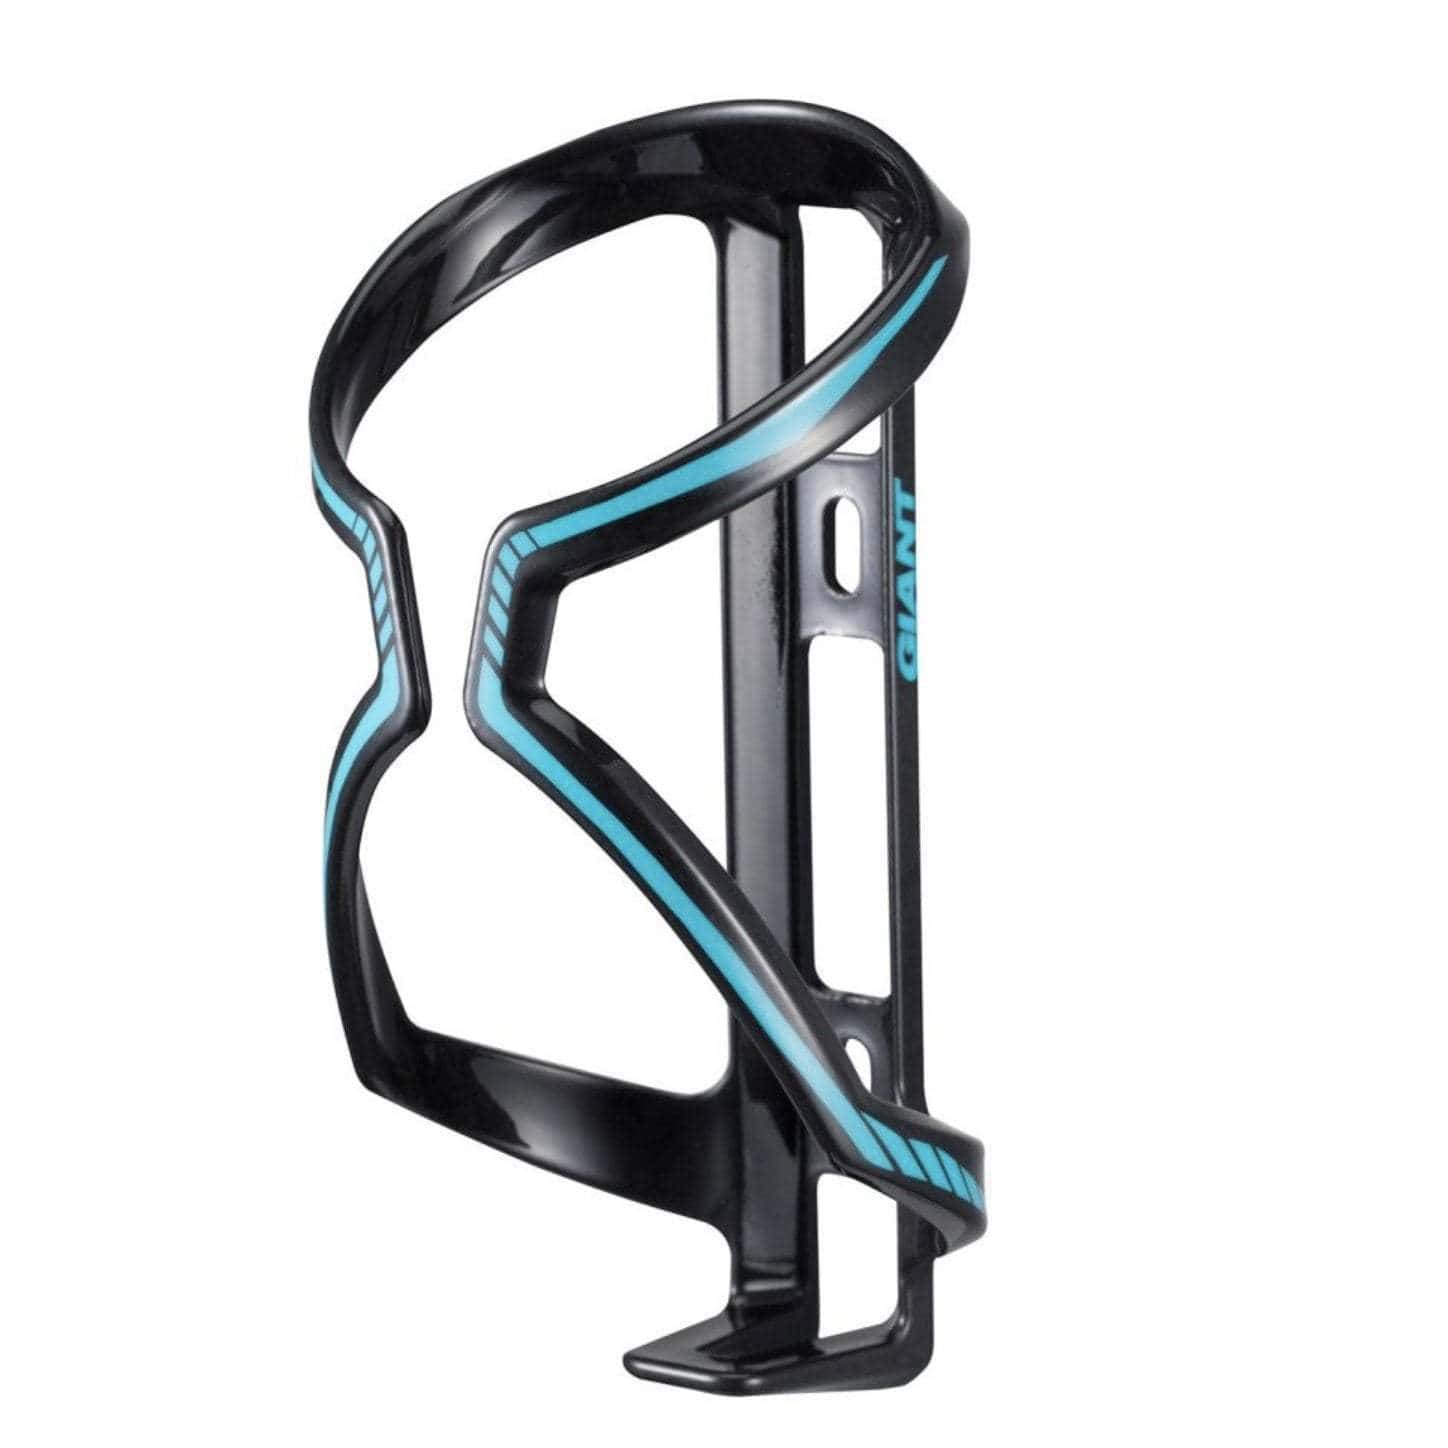 Giant Airway Composite Water Bottle Cage